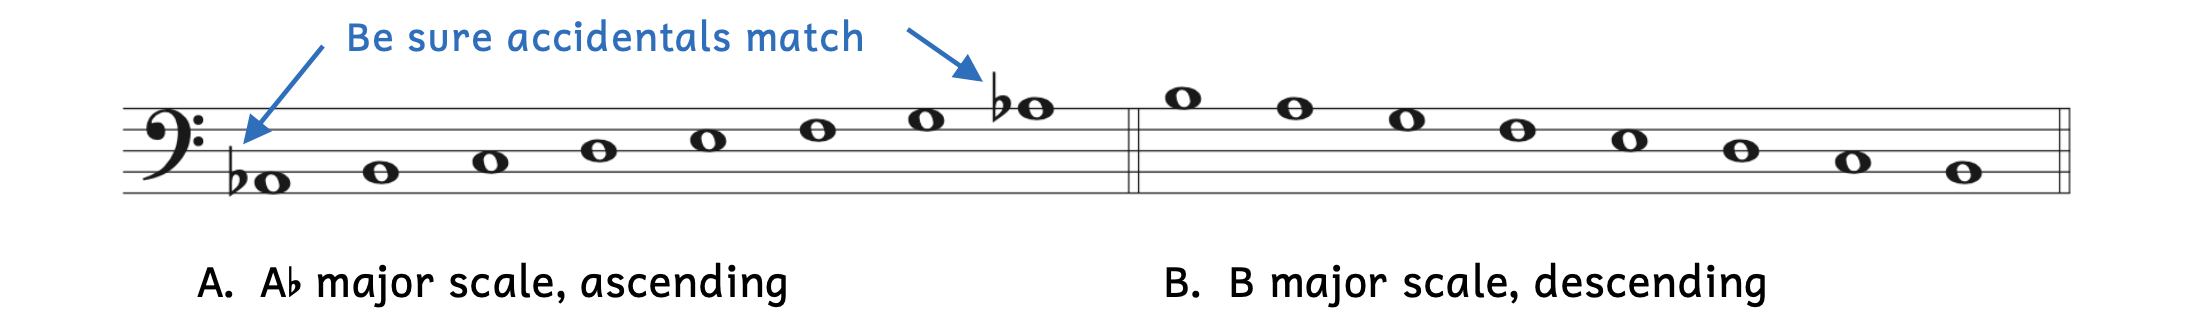 Example A shows pitches written out diatonically from A-flat2 to A-flat3. Be sure the accidentals match for notes an octave apart. Example B shows pitches written out diatonically from B3 to B2.